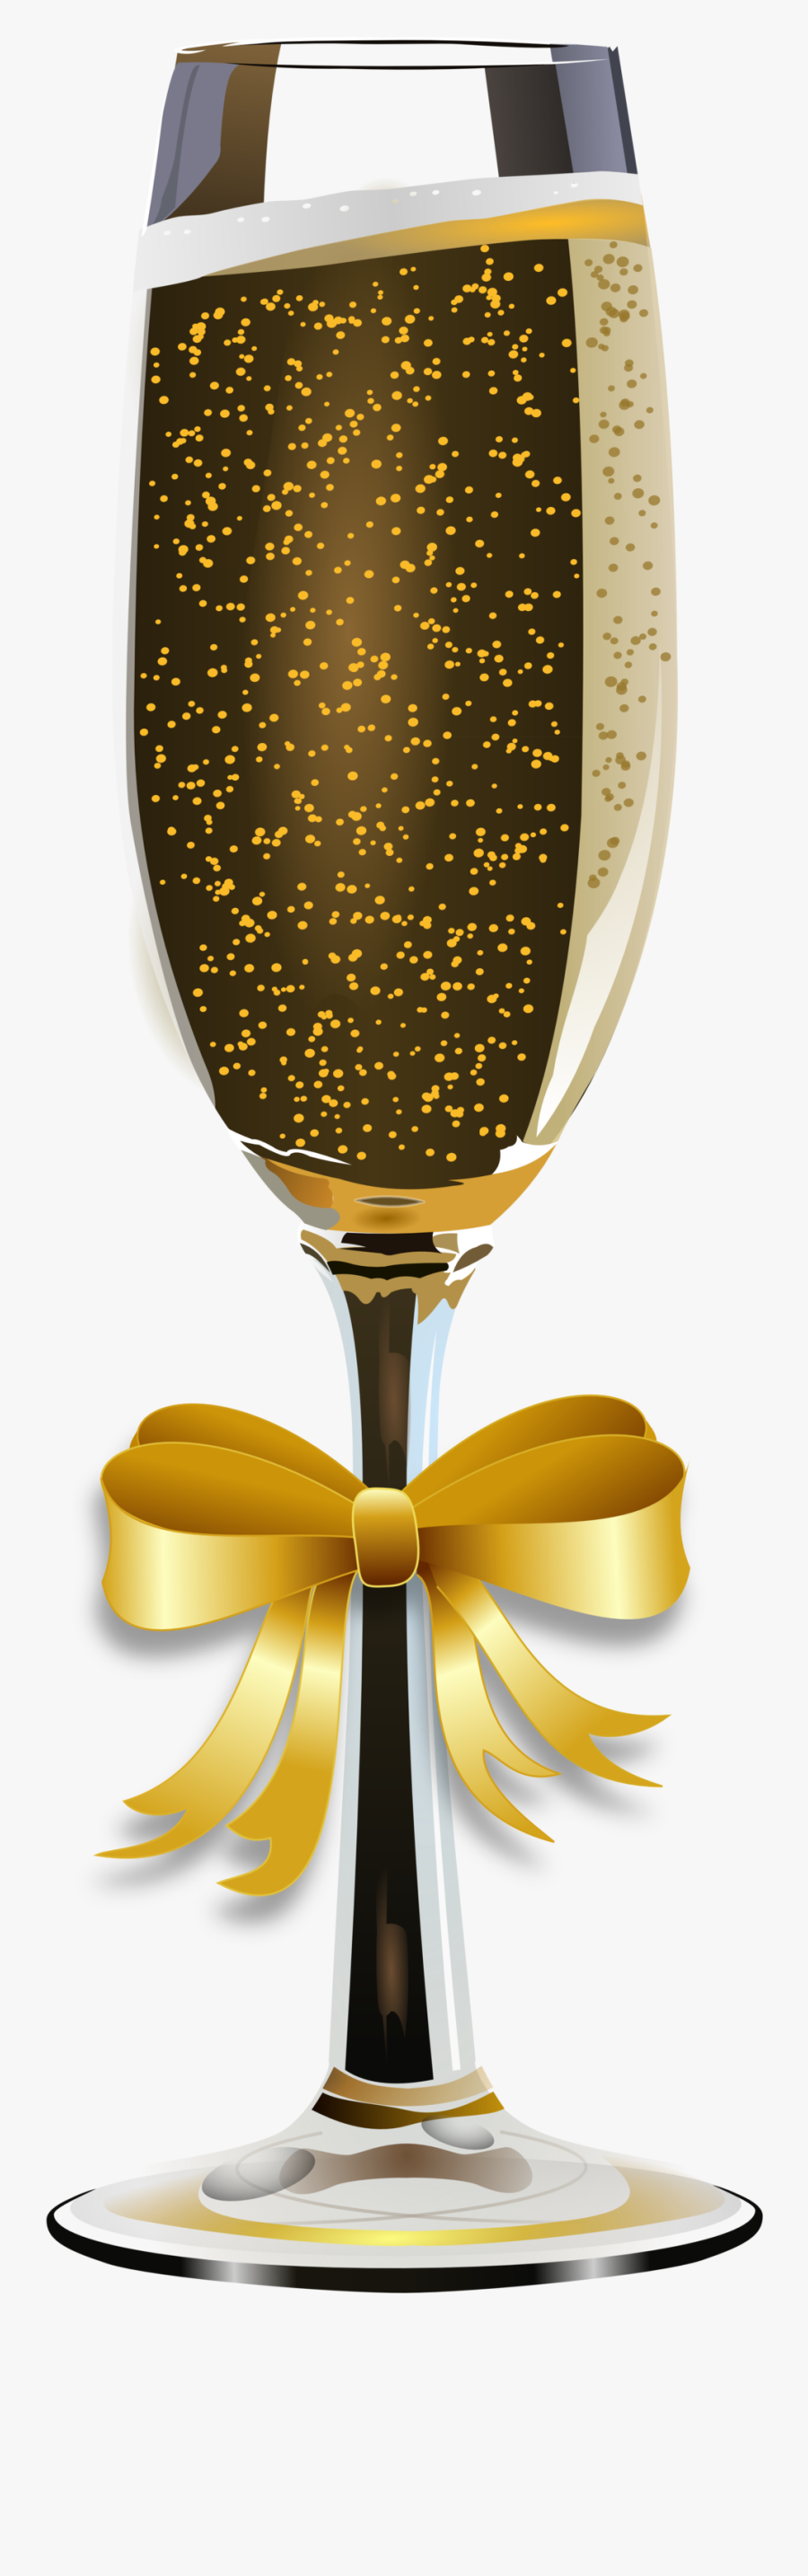 Gold Clipart Wine Glass - Gold Wine Glass Clipart, Transparent Clipart